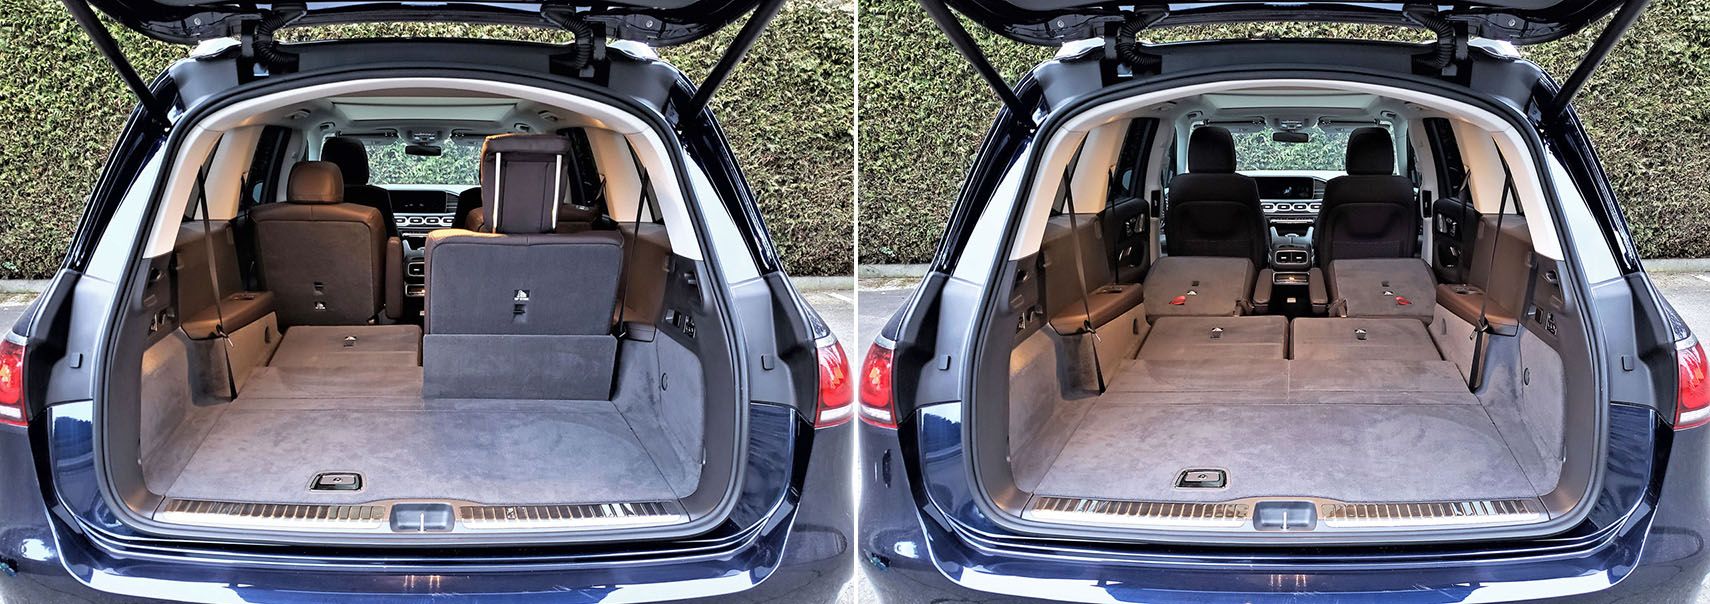 No matter what you're hauling inside, the GLS has the power to do it.